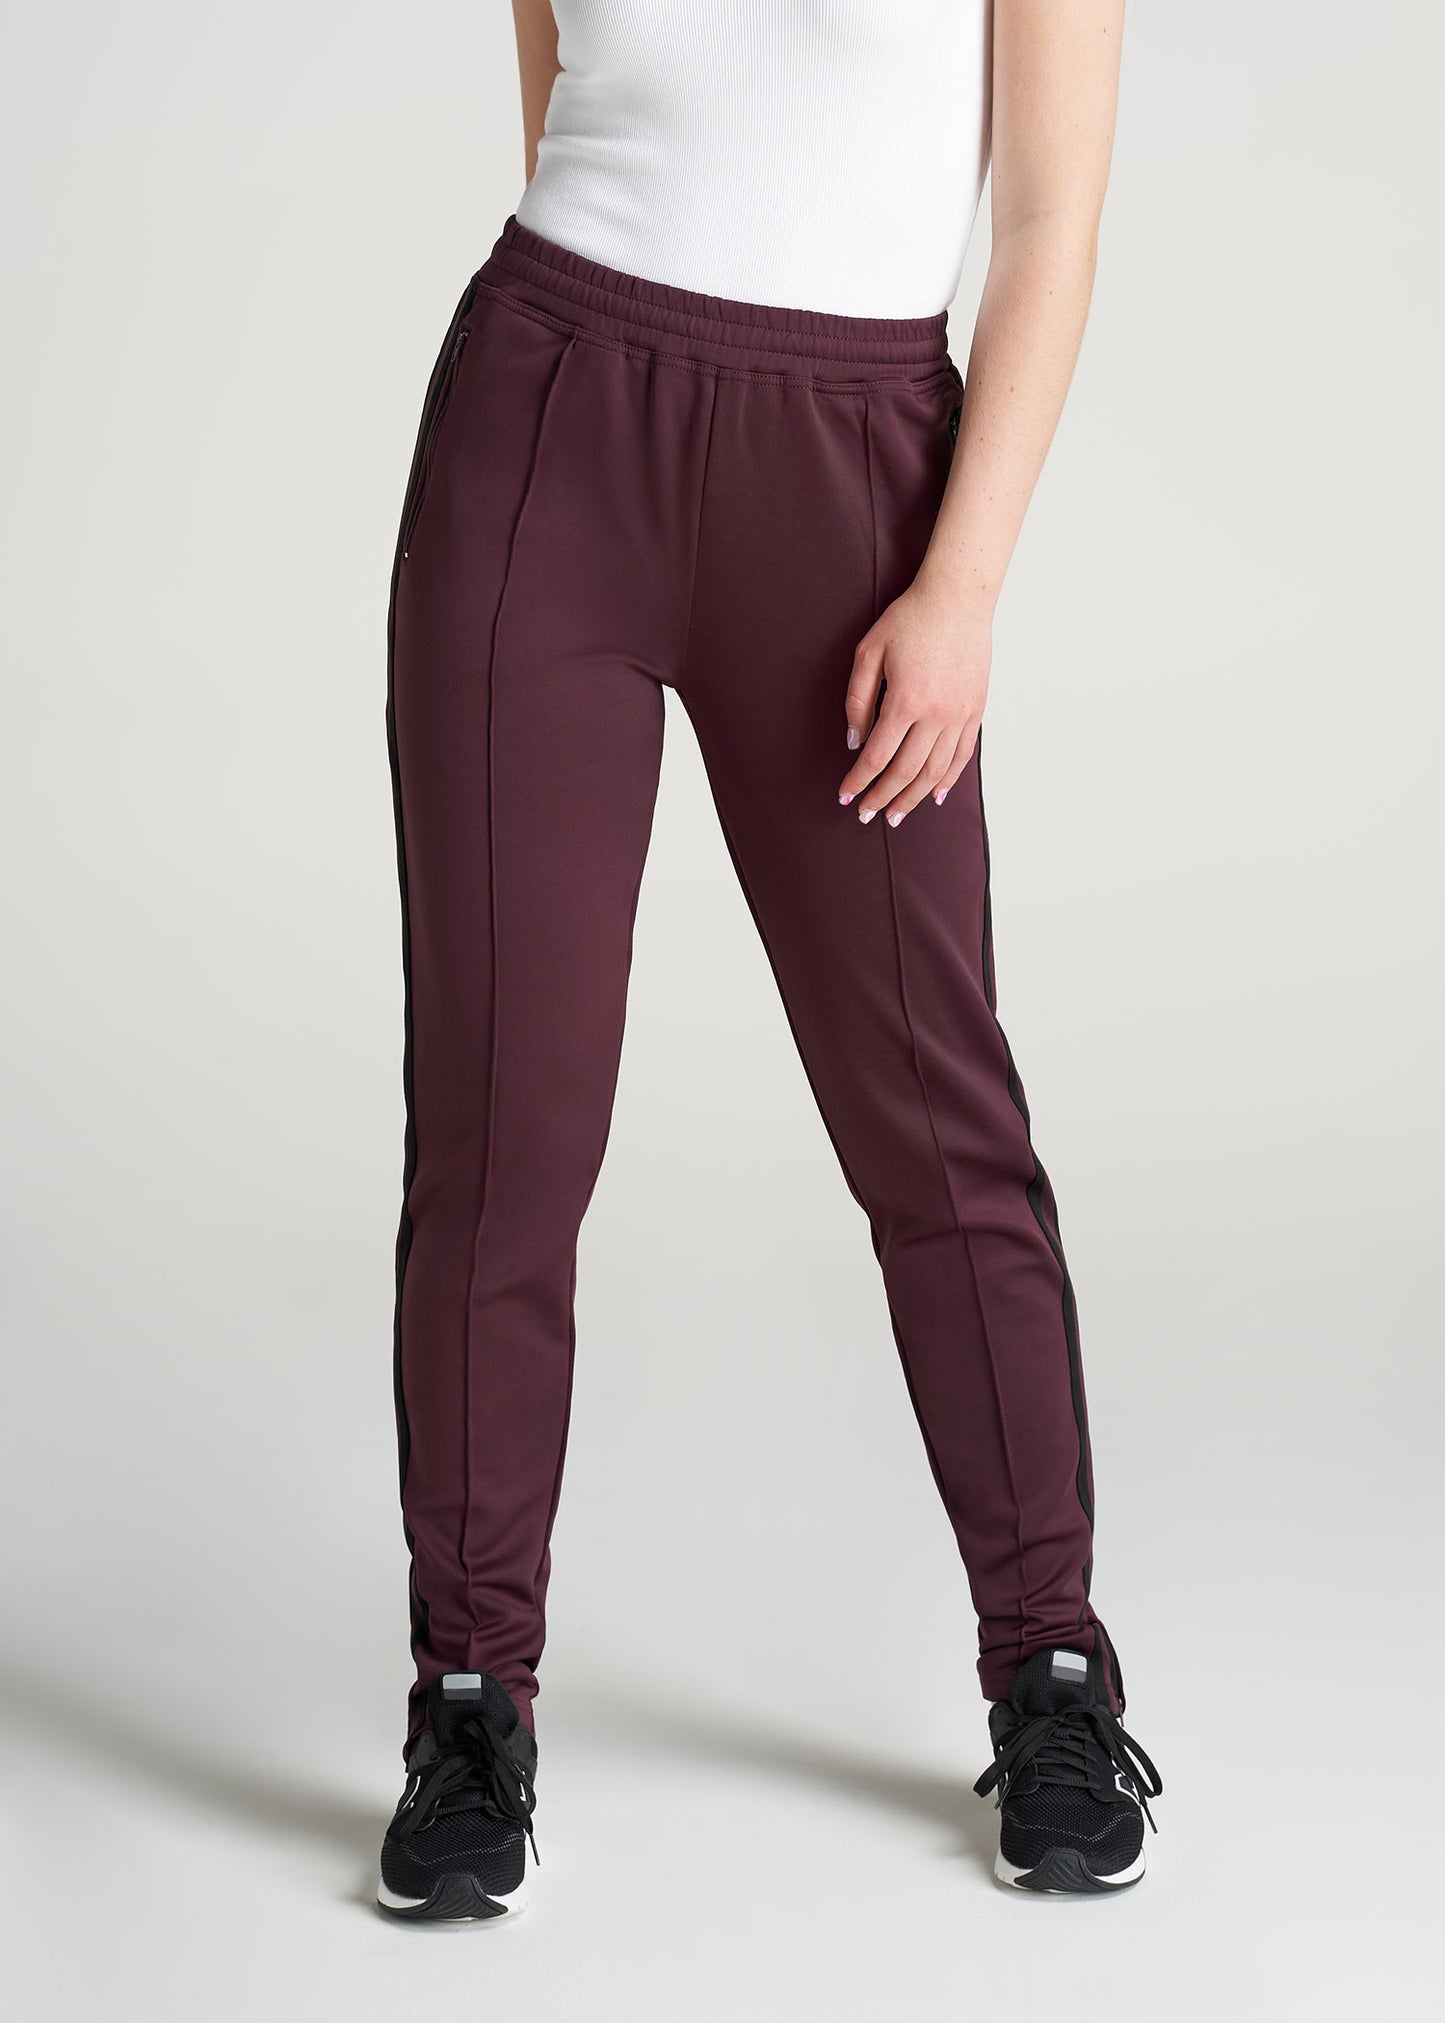 American-Tall-Women-Athletic-StripePant-Beetroot_Black-front